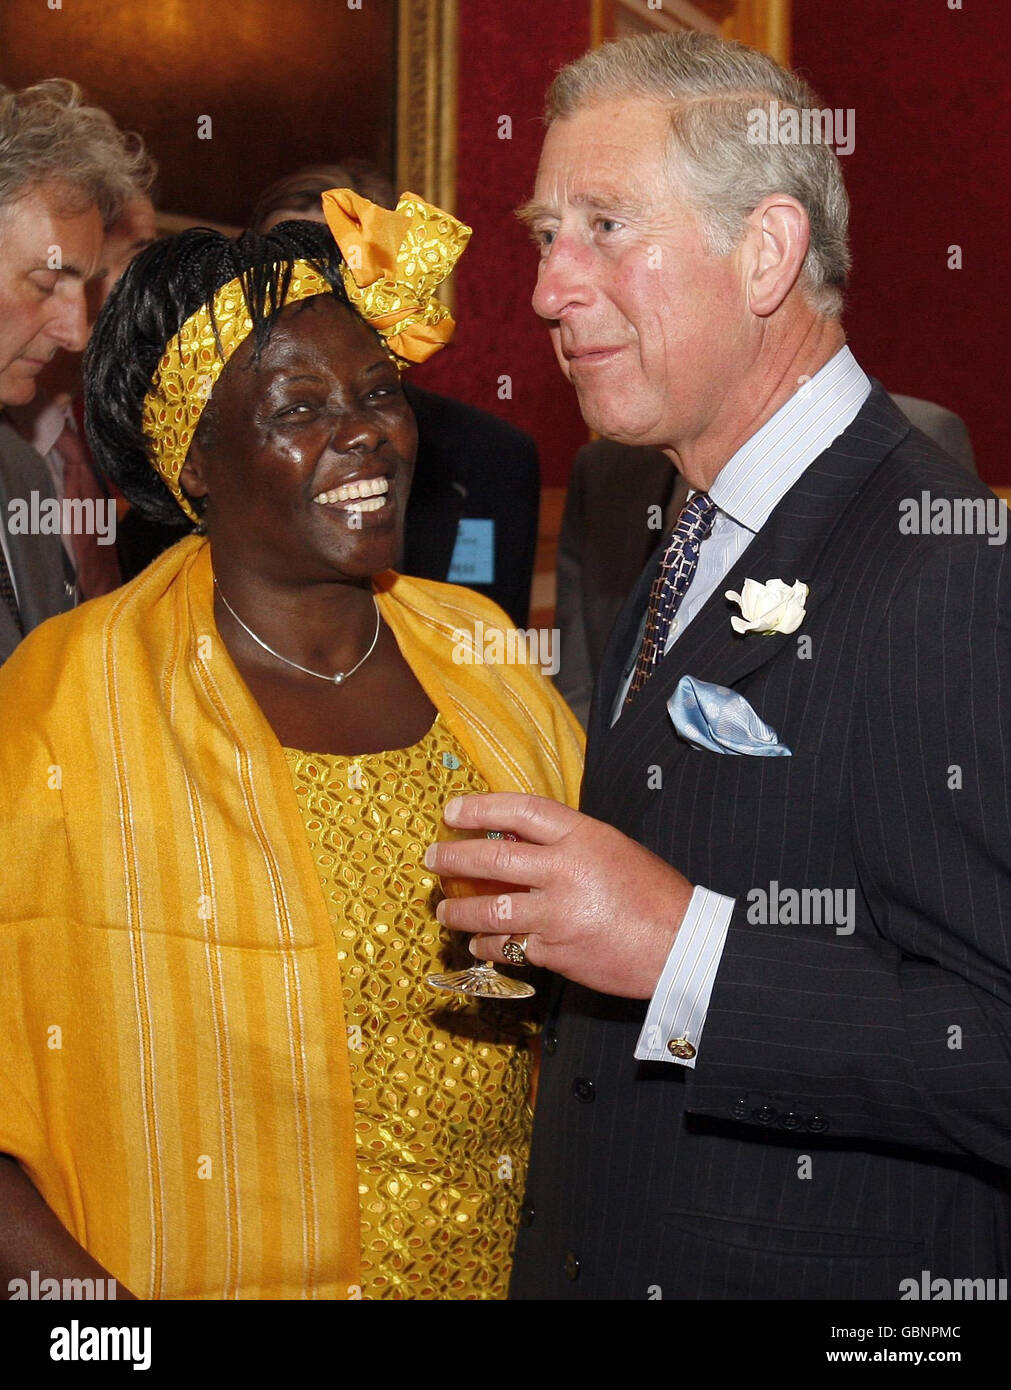 The Prince of Wales, right, Patron of the University of Cambridge Programme for Sustainability Leadership, talks with Kenya's Professor Wangari Maathai the winner of the Nobel Prize in Peace in 2004, during a reception for Nobel Laureates and climate change experts at St James's Palace in London. Stock Photo